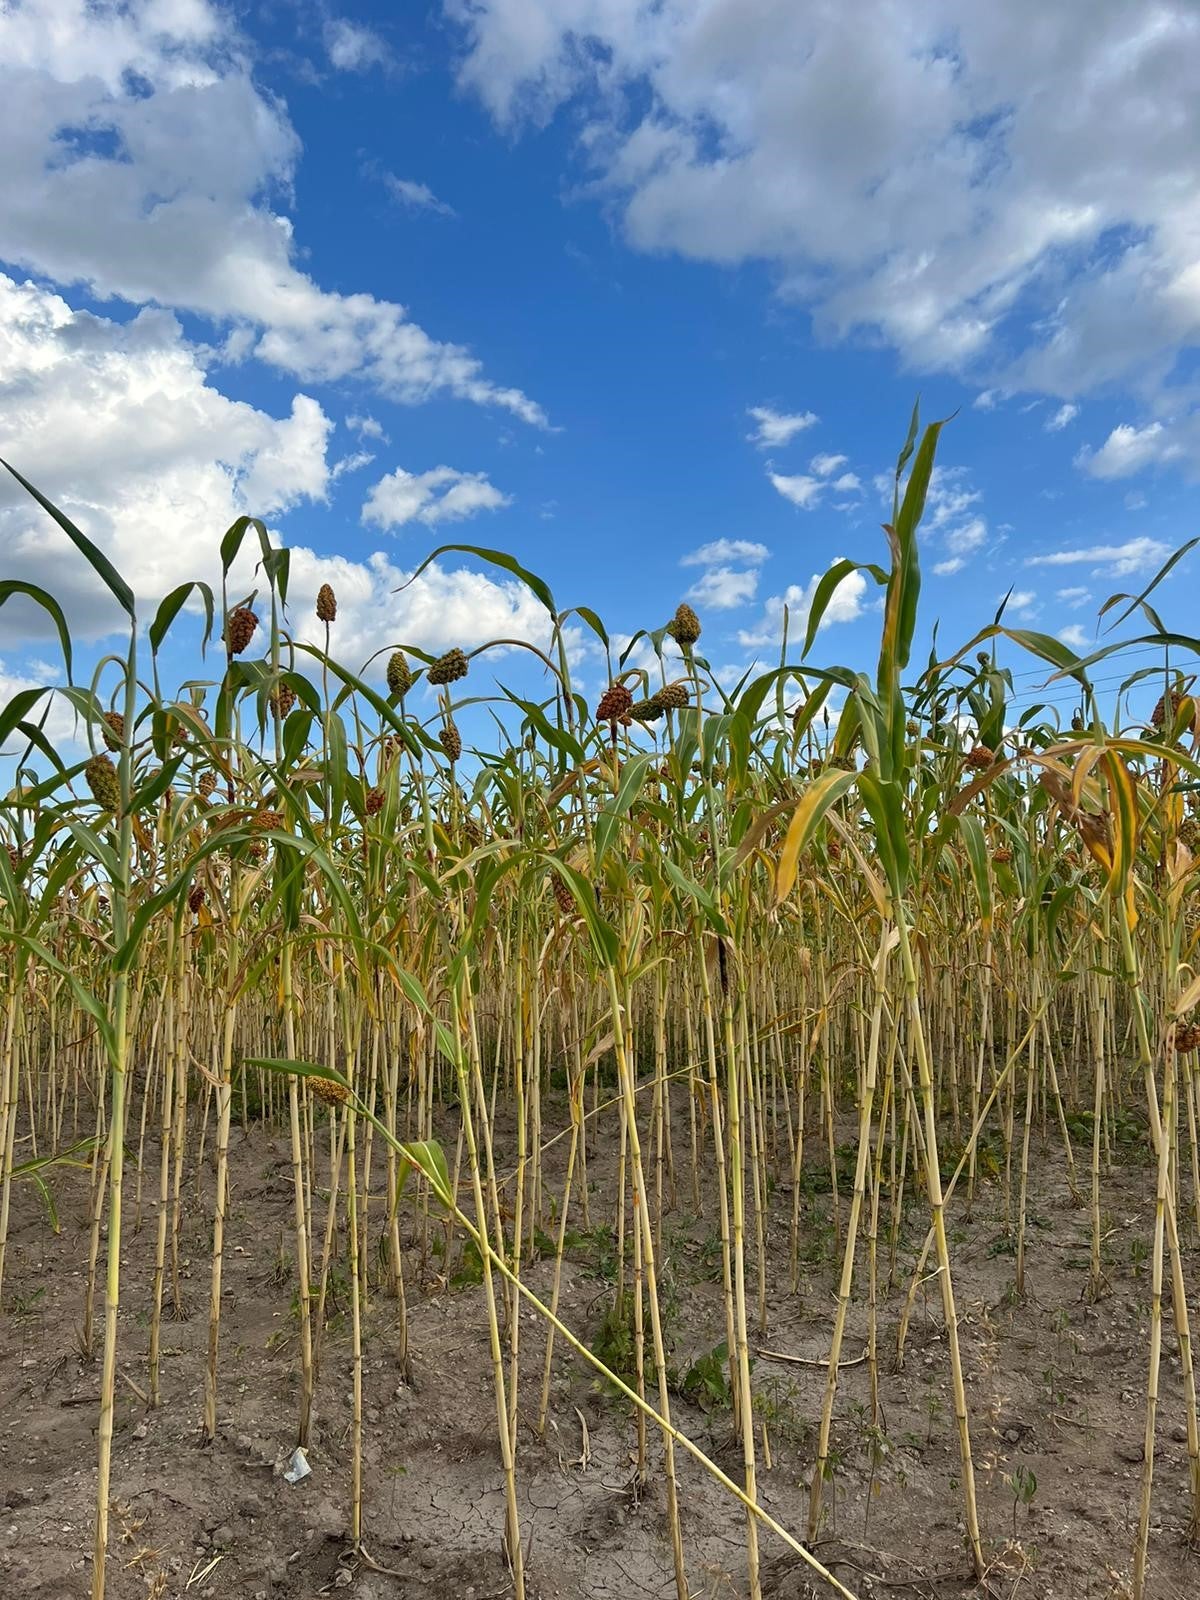 Crops of sorghum, a basic commodity in the region, are failing in the extreme drought